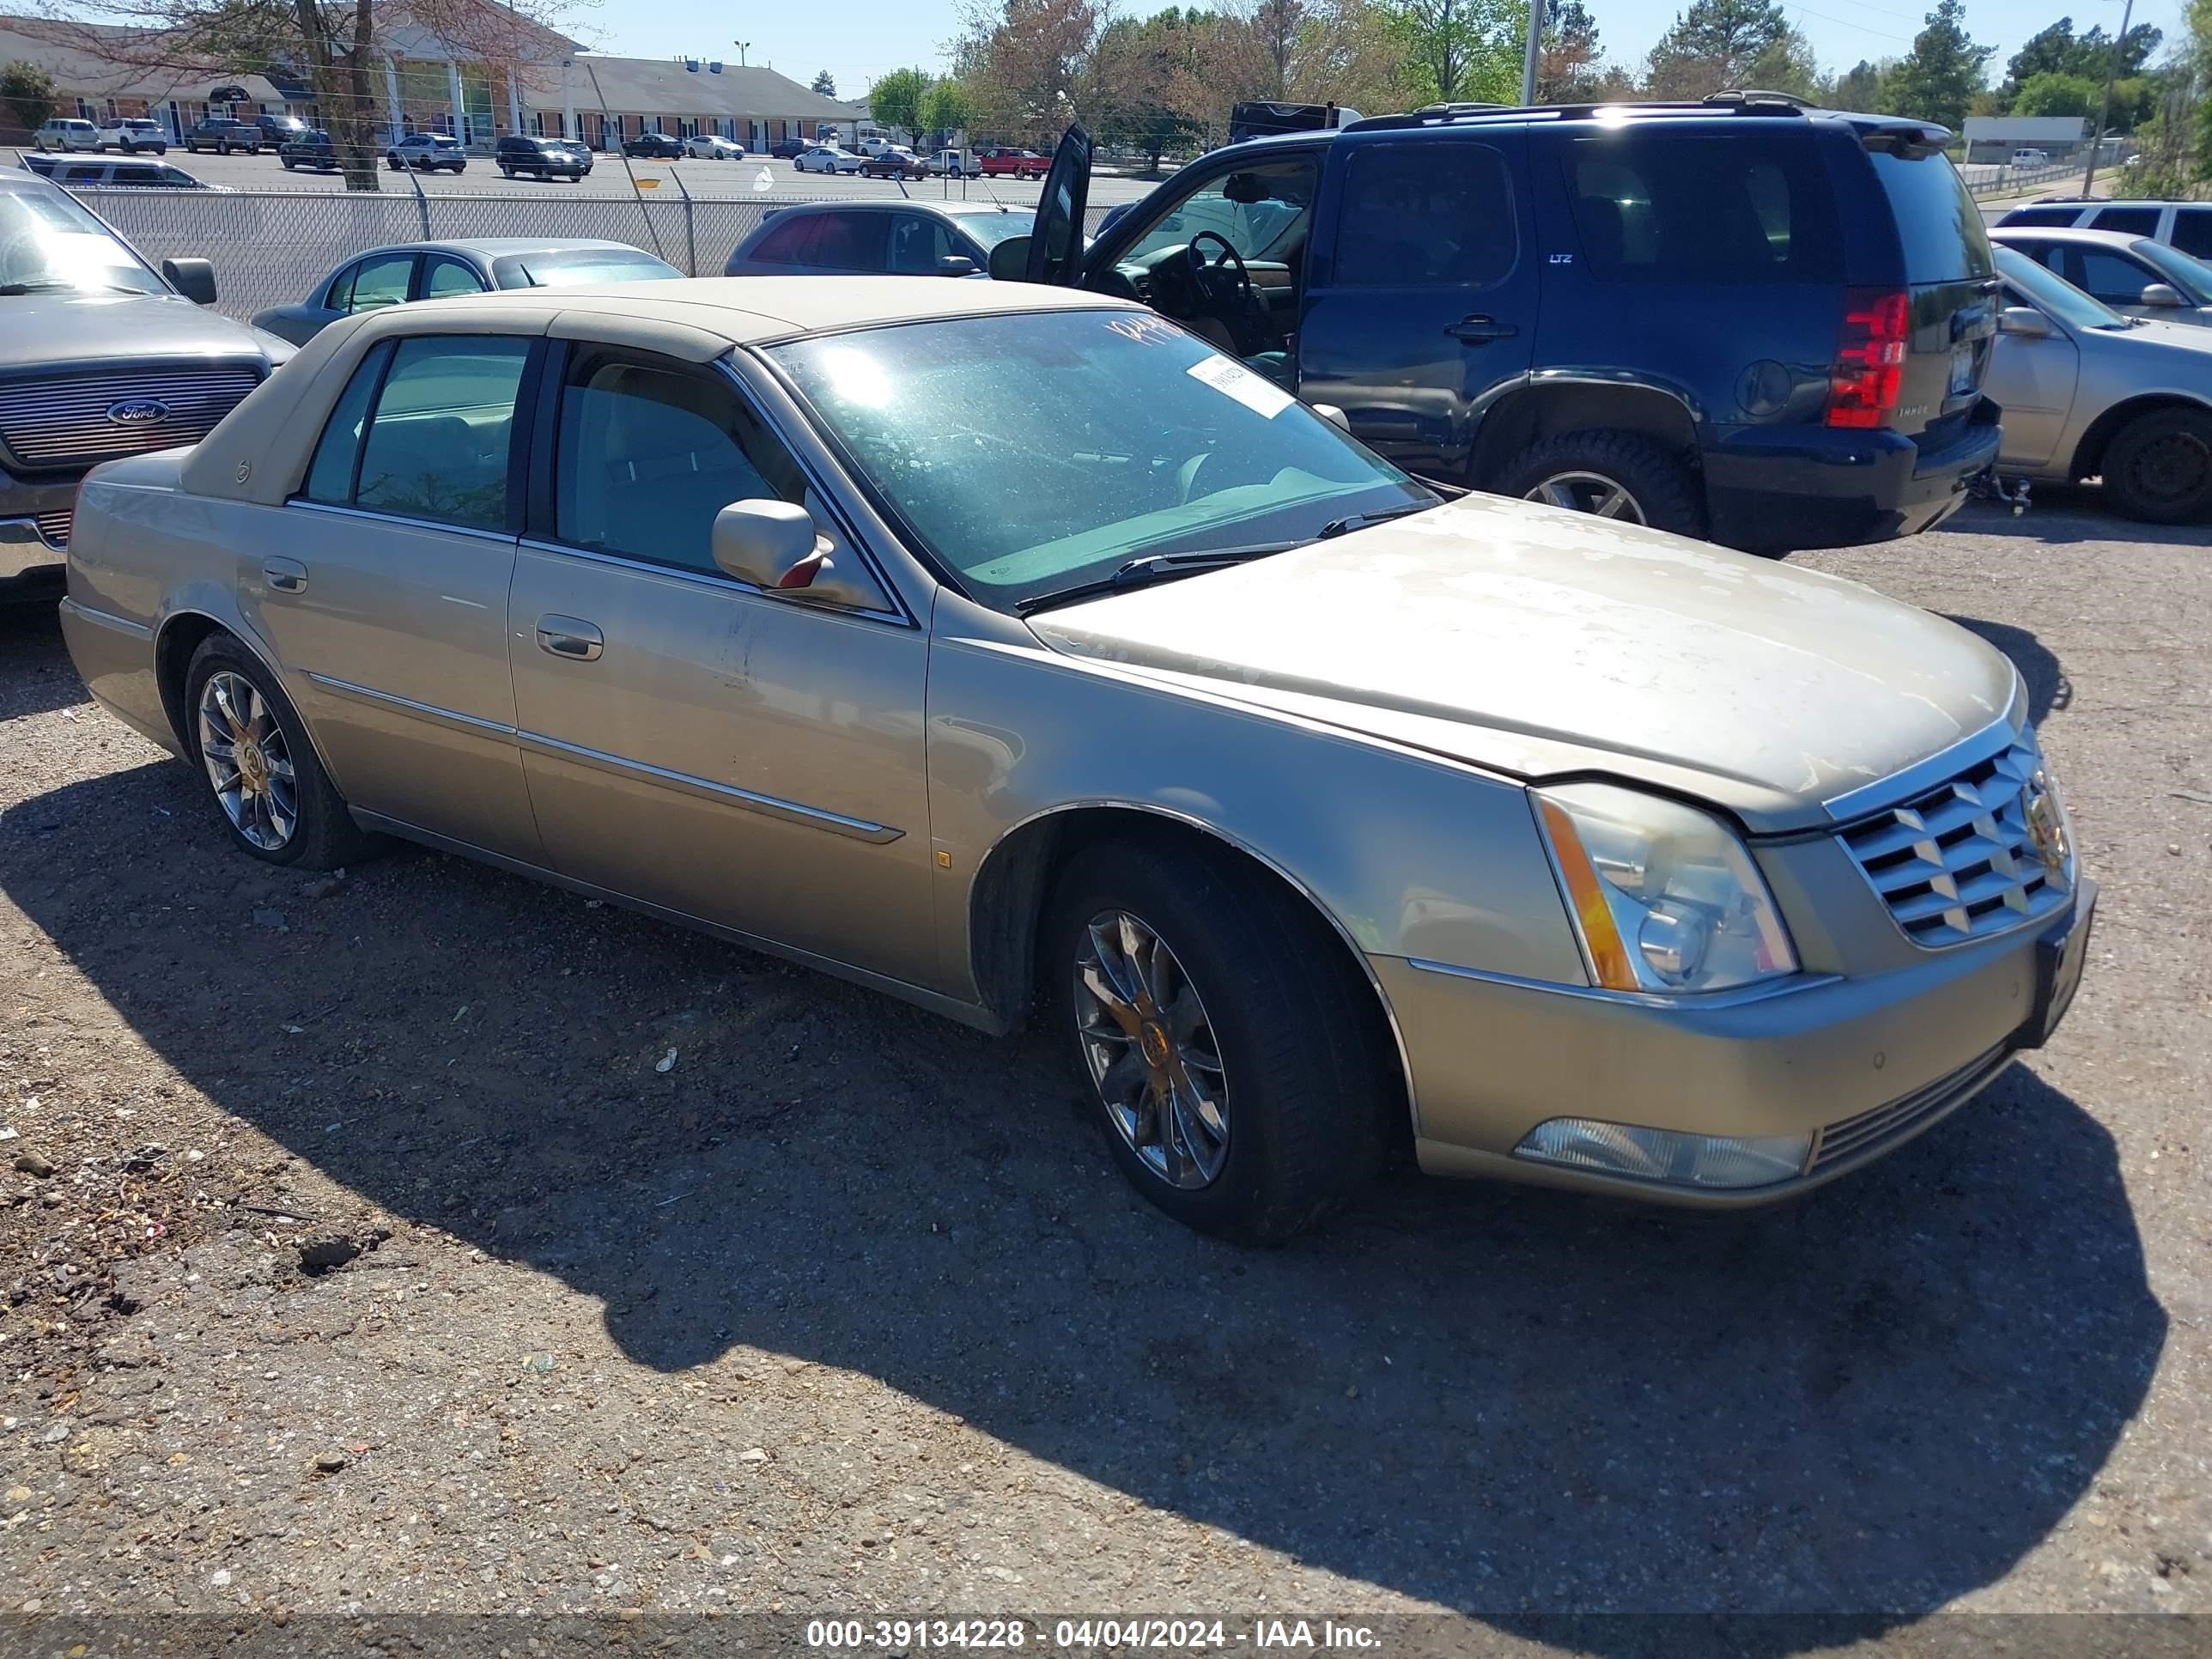 vin: 1G6KD57Y78U138745 1G6KD57Y78U138745 2008 cadillac dts 4600 for Sale in 38118, 5400 Getwell Road, Memphis, Tennessee, USA